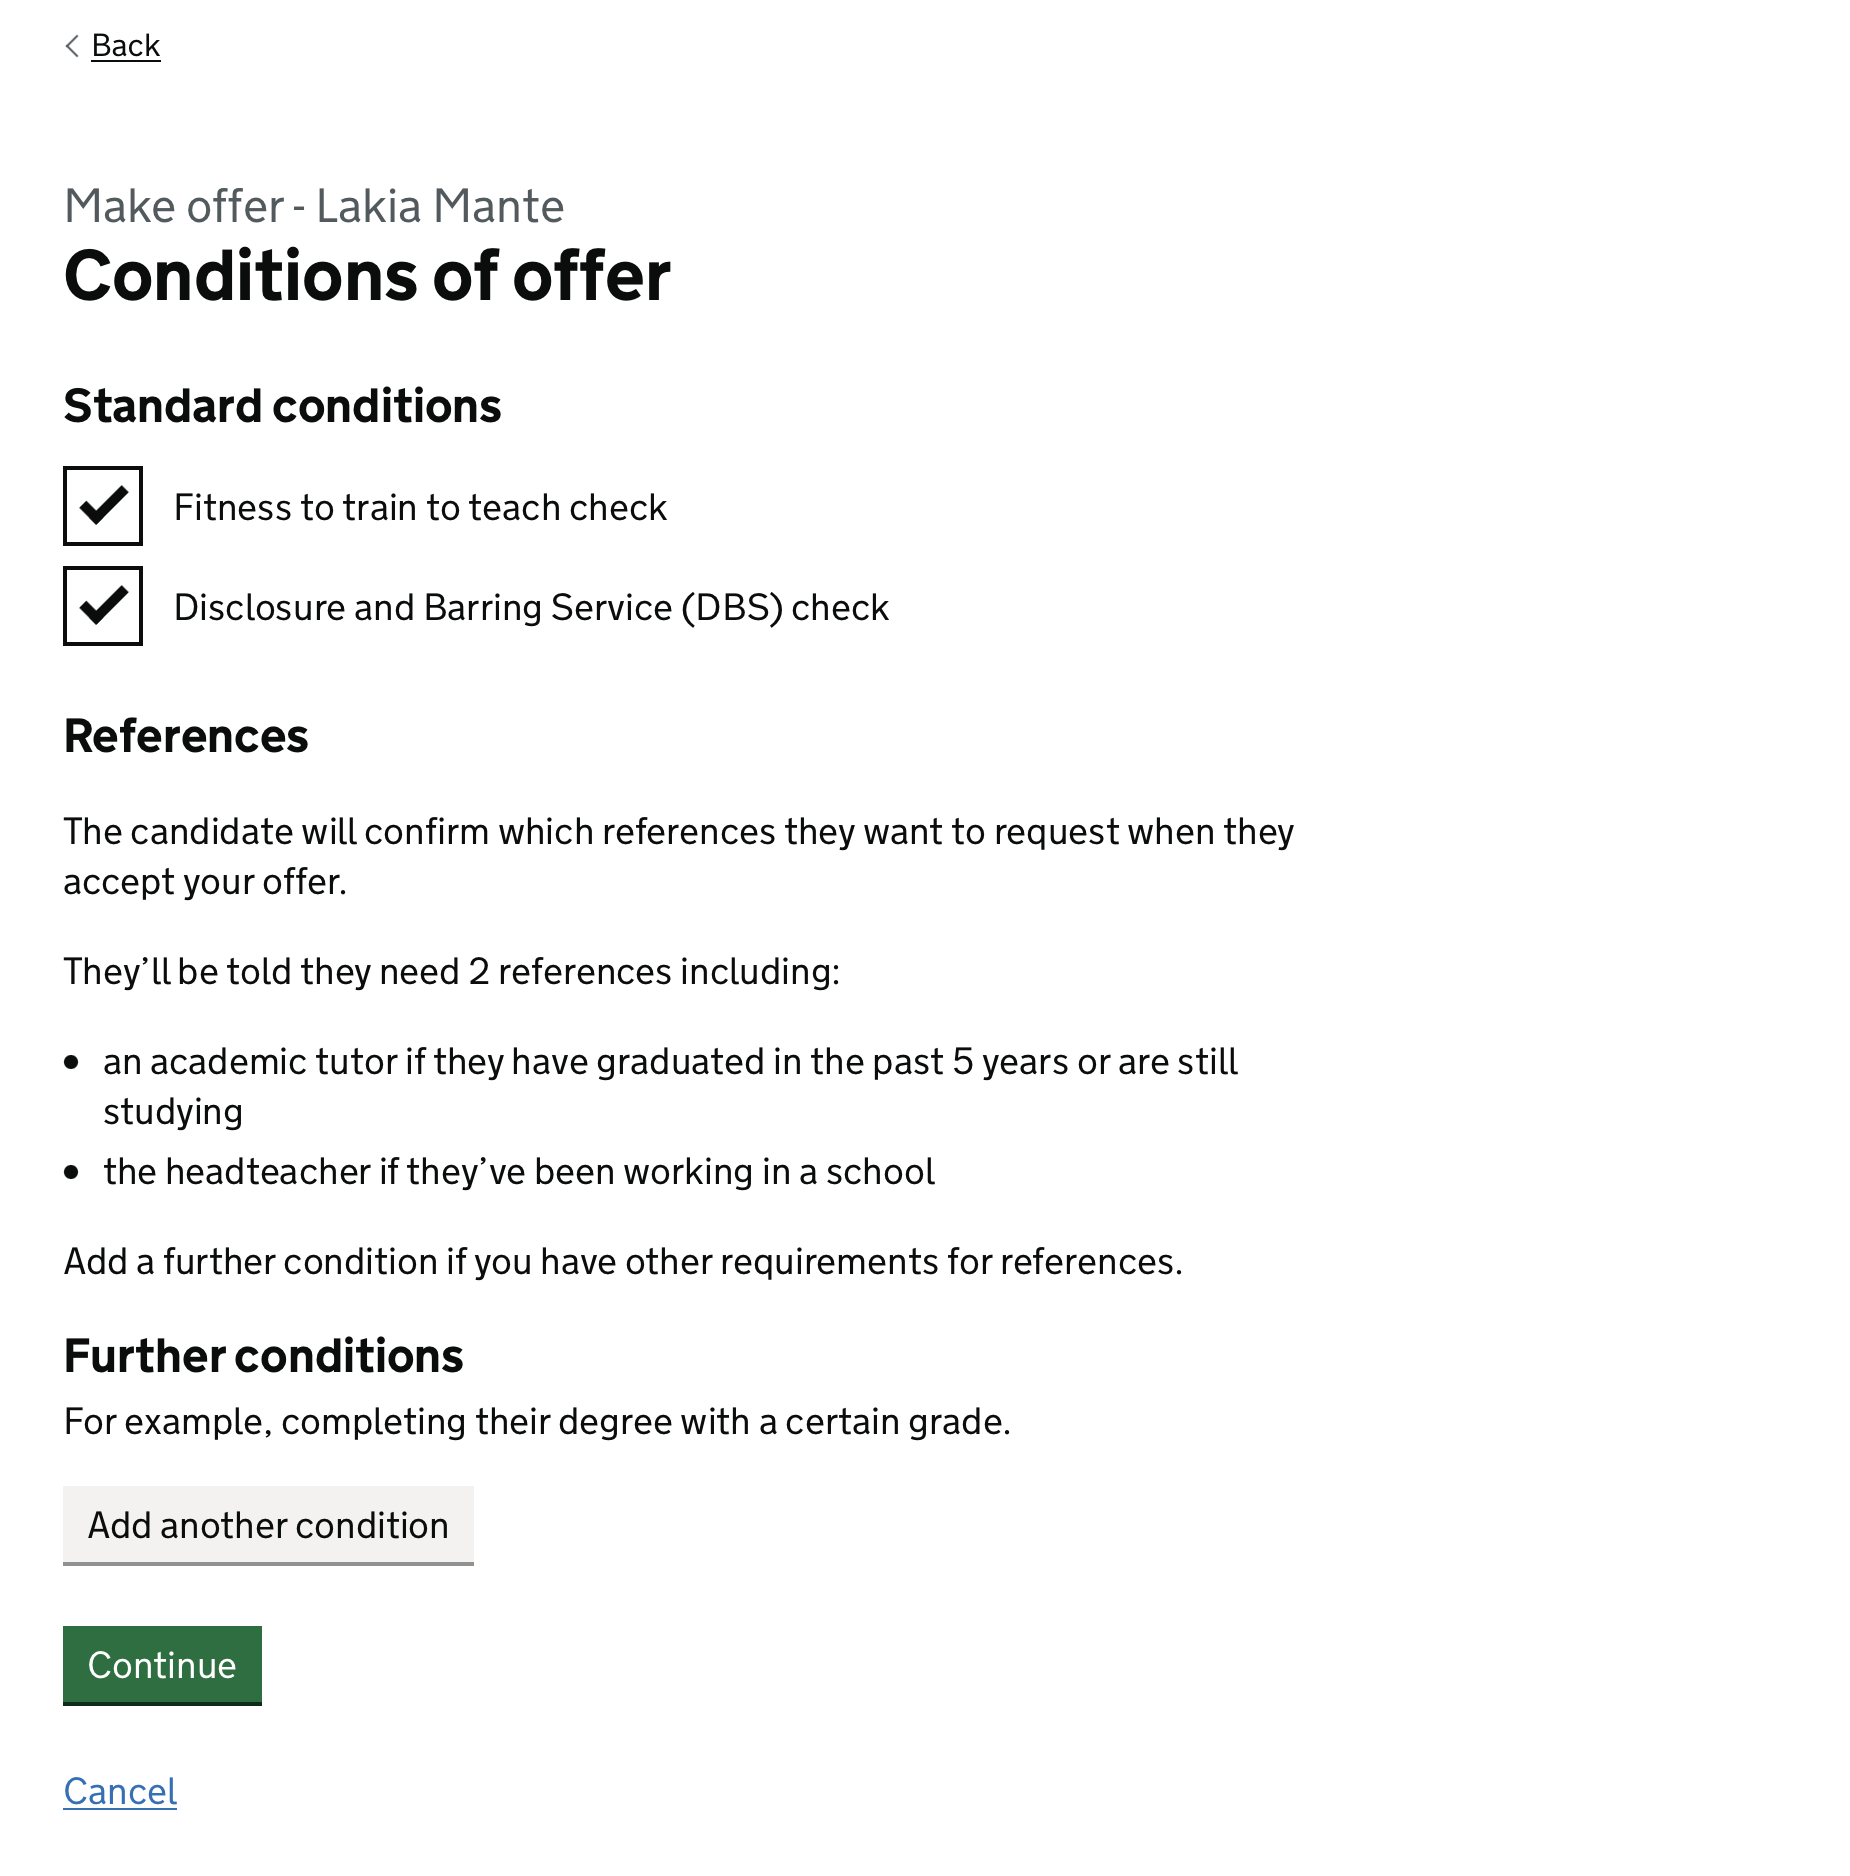 Screenshot with the heading ‘Conditions of offer’. On the page are subheadings for ‘Standard conditions’, ‘References’ and ‘Further conditions’. Under standard conditons, there are 2 checkboxes for Fitness to train to teach check, and Disclosure and Barring Service (DBS) check. Under Further conditions there is a button labelled ‘Add another condition’.